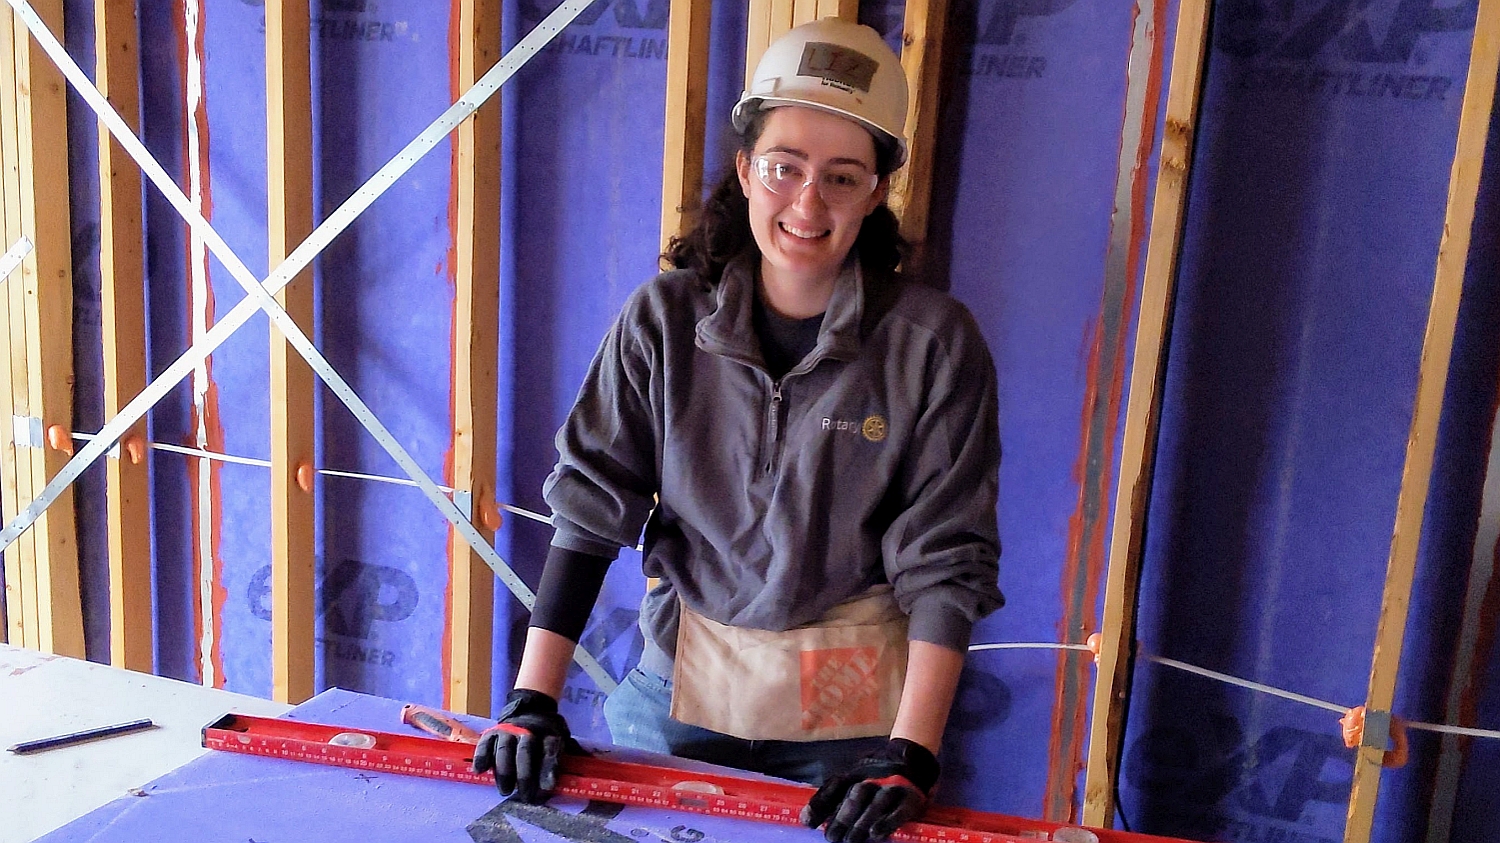 Project Management Lite intern Liz Roach lends a hand at the Habitat for Humanity event.